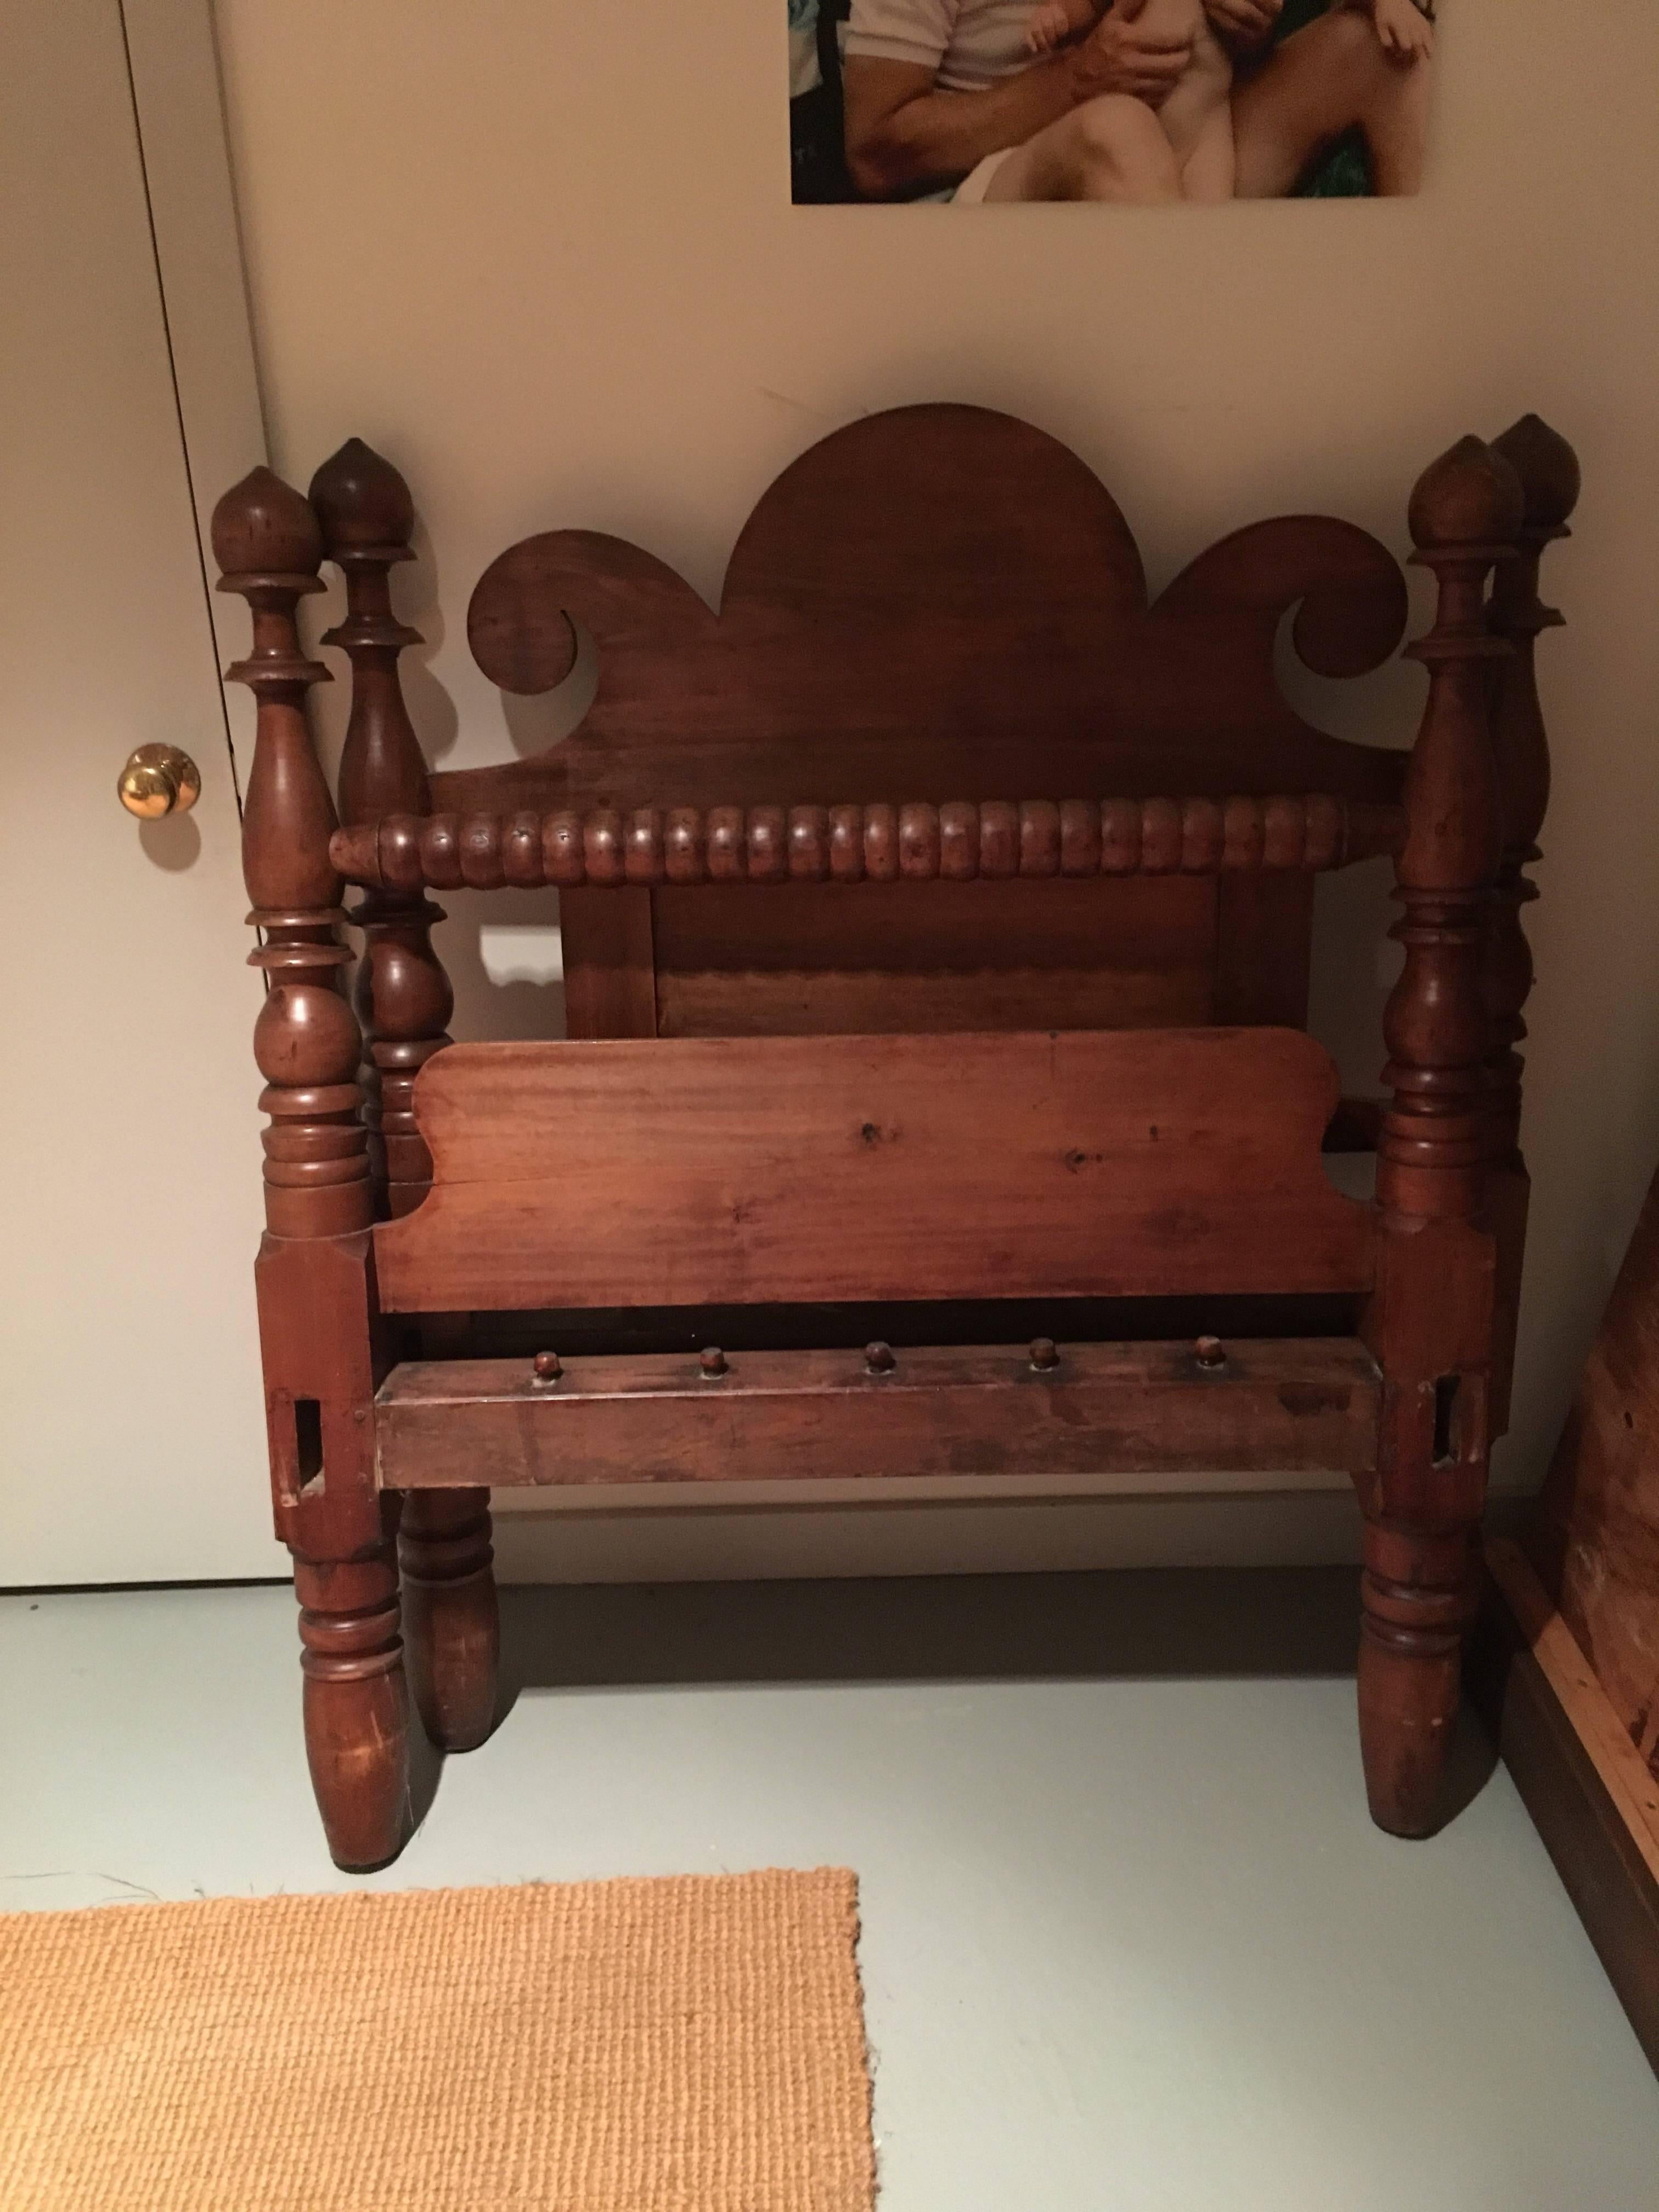 American twin size poster bed with fleur-de-lys-back. This is a very playful design for a twin bed. The headboard is probably from walnut, carved in a fleur-de-lys motif. Footboard has a flat panel on the lower area and a hand-turned bobbin rail at